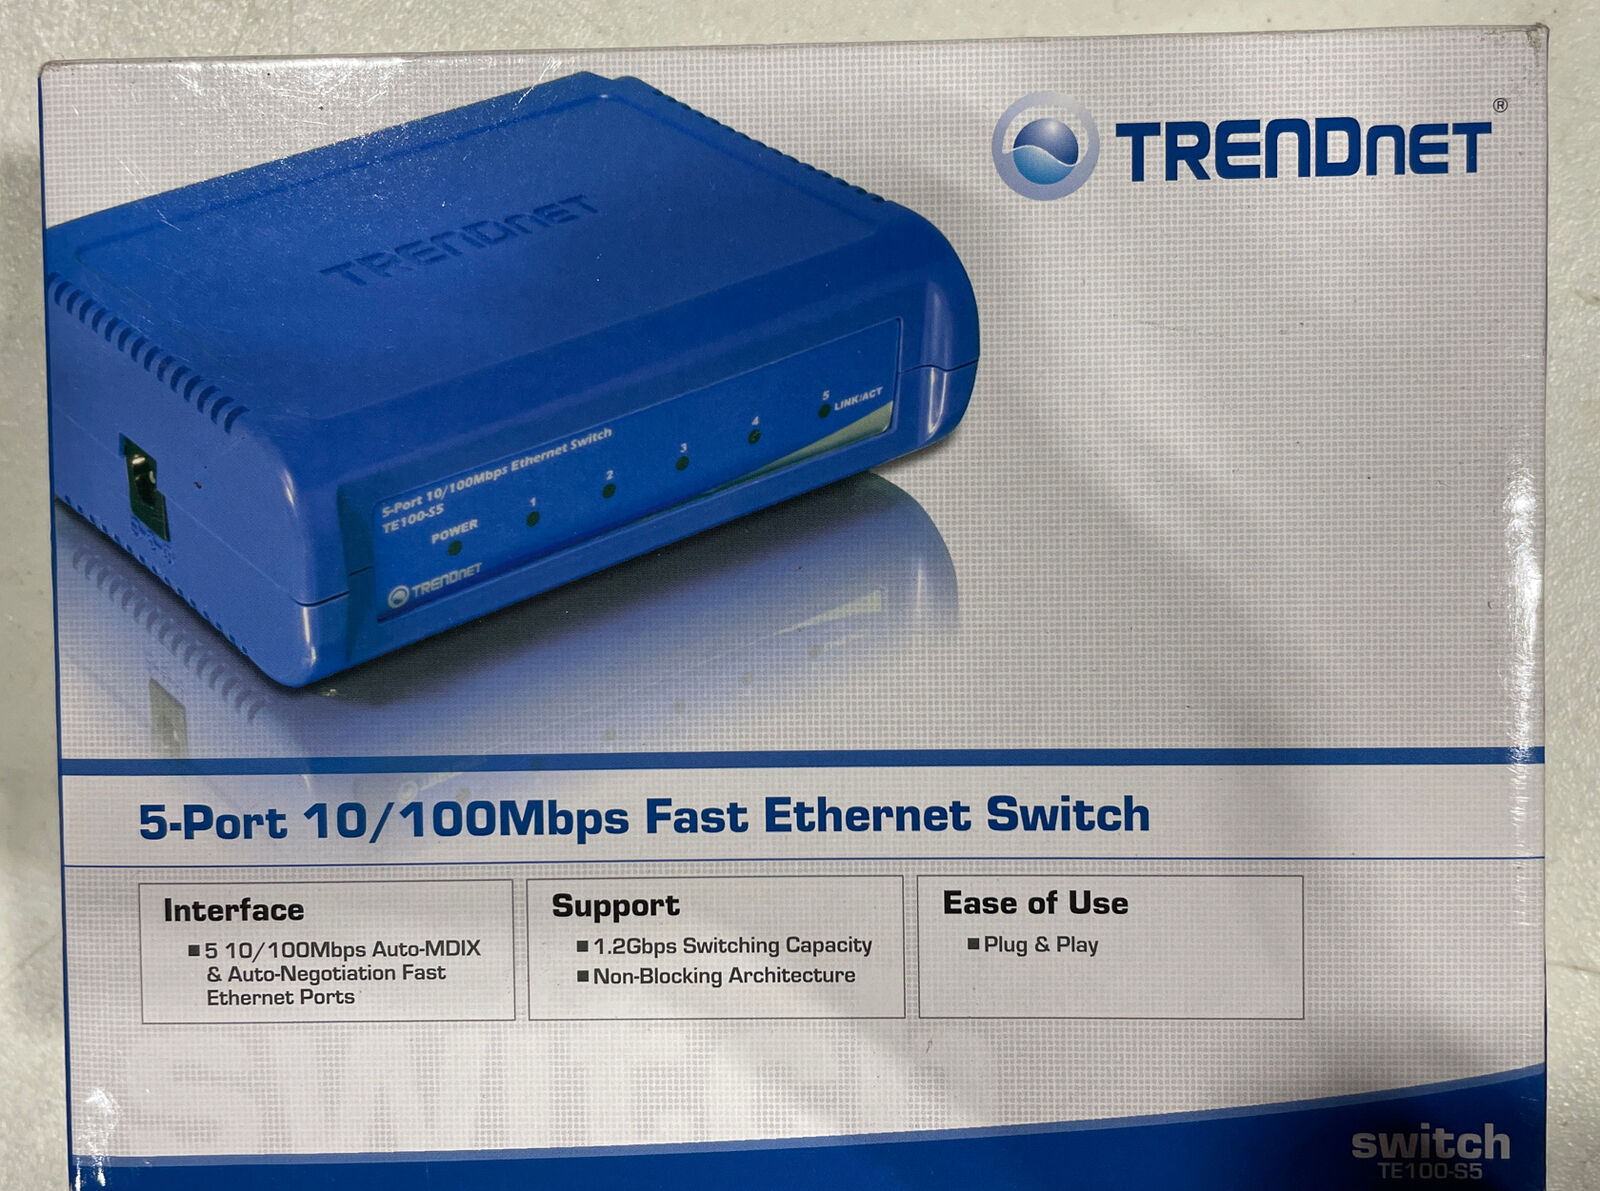 TRENDnet  5-Port 10/100Mbps Fast Ethernet  Switch. Plug & Play 1.2Gbps Switching